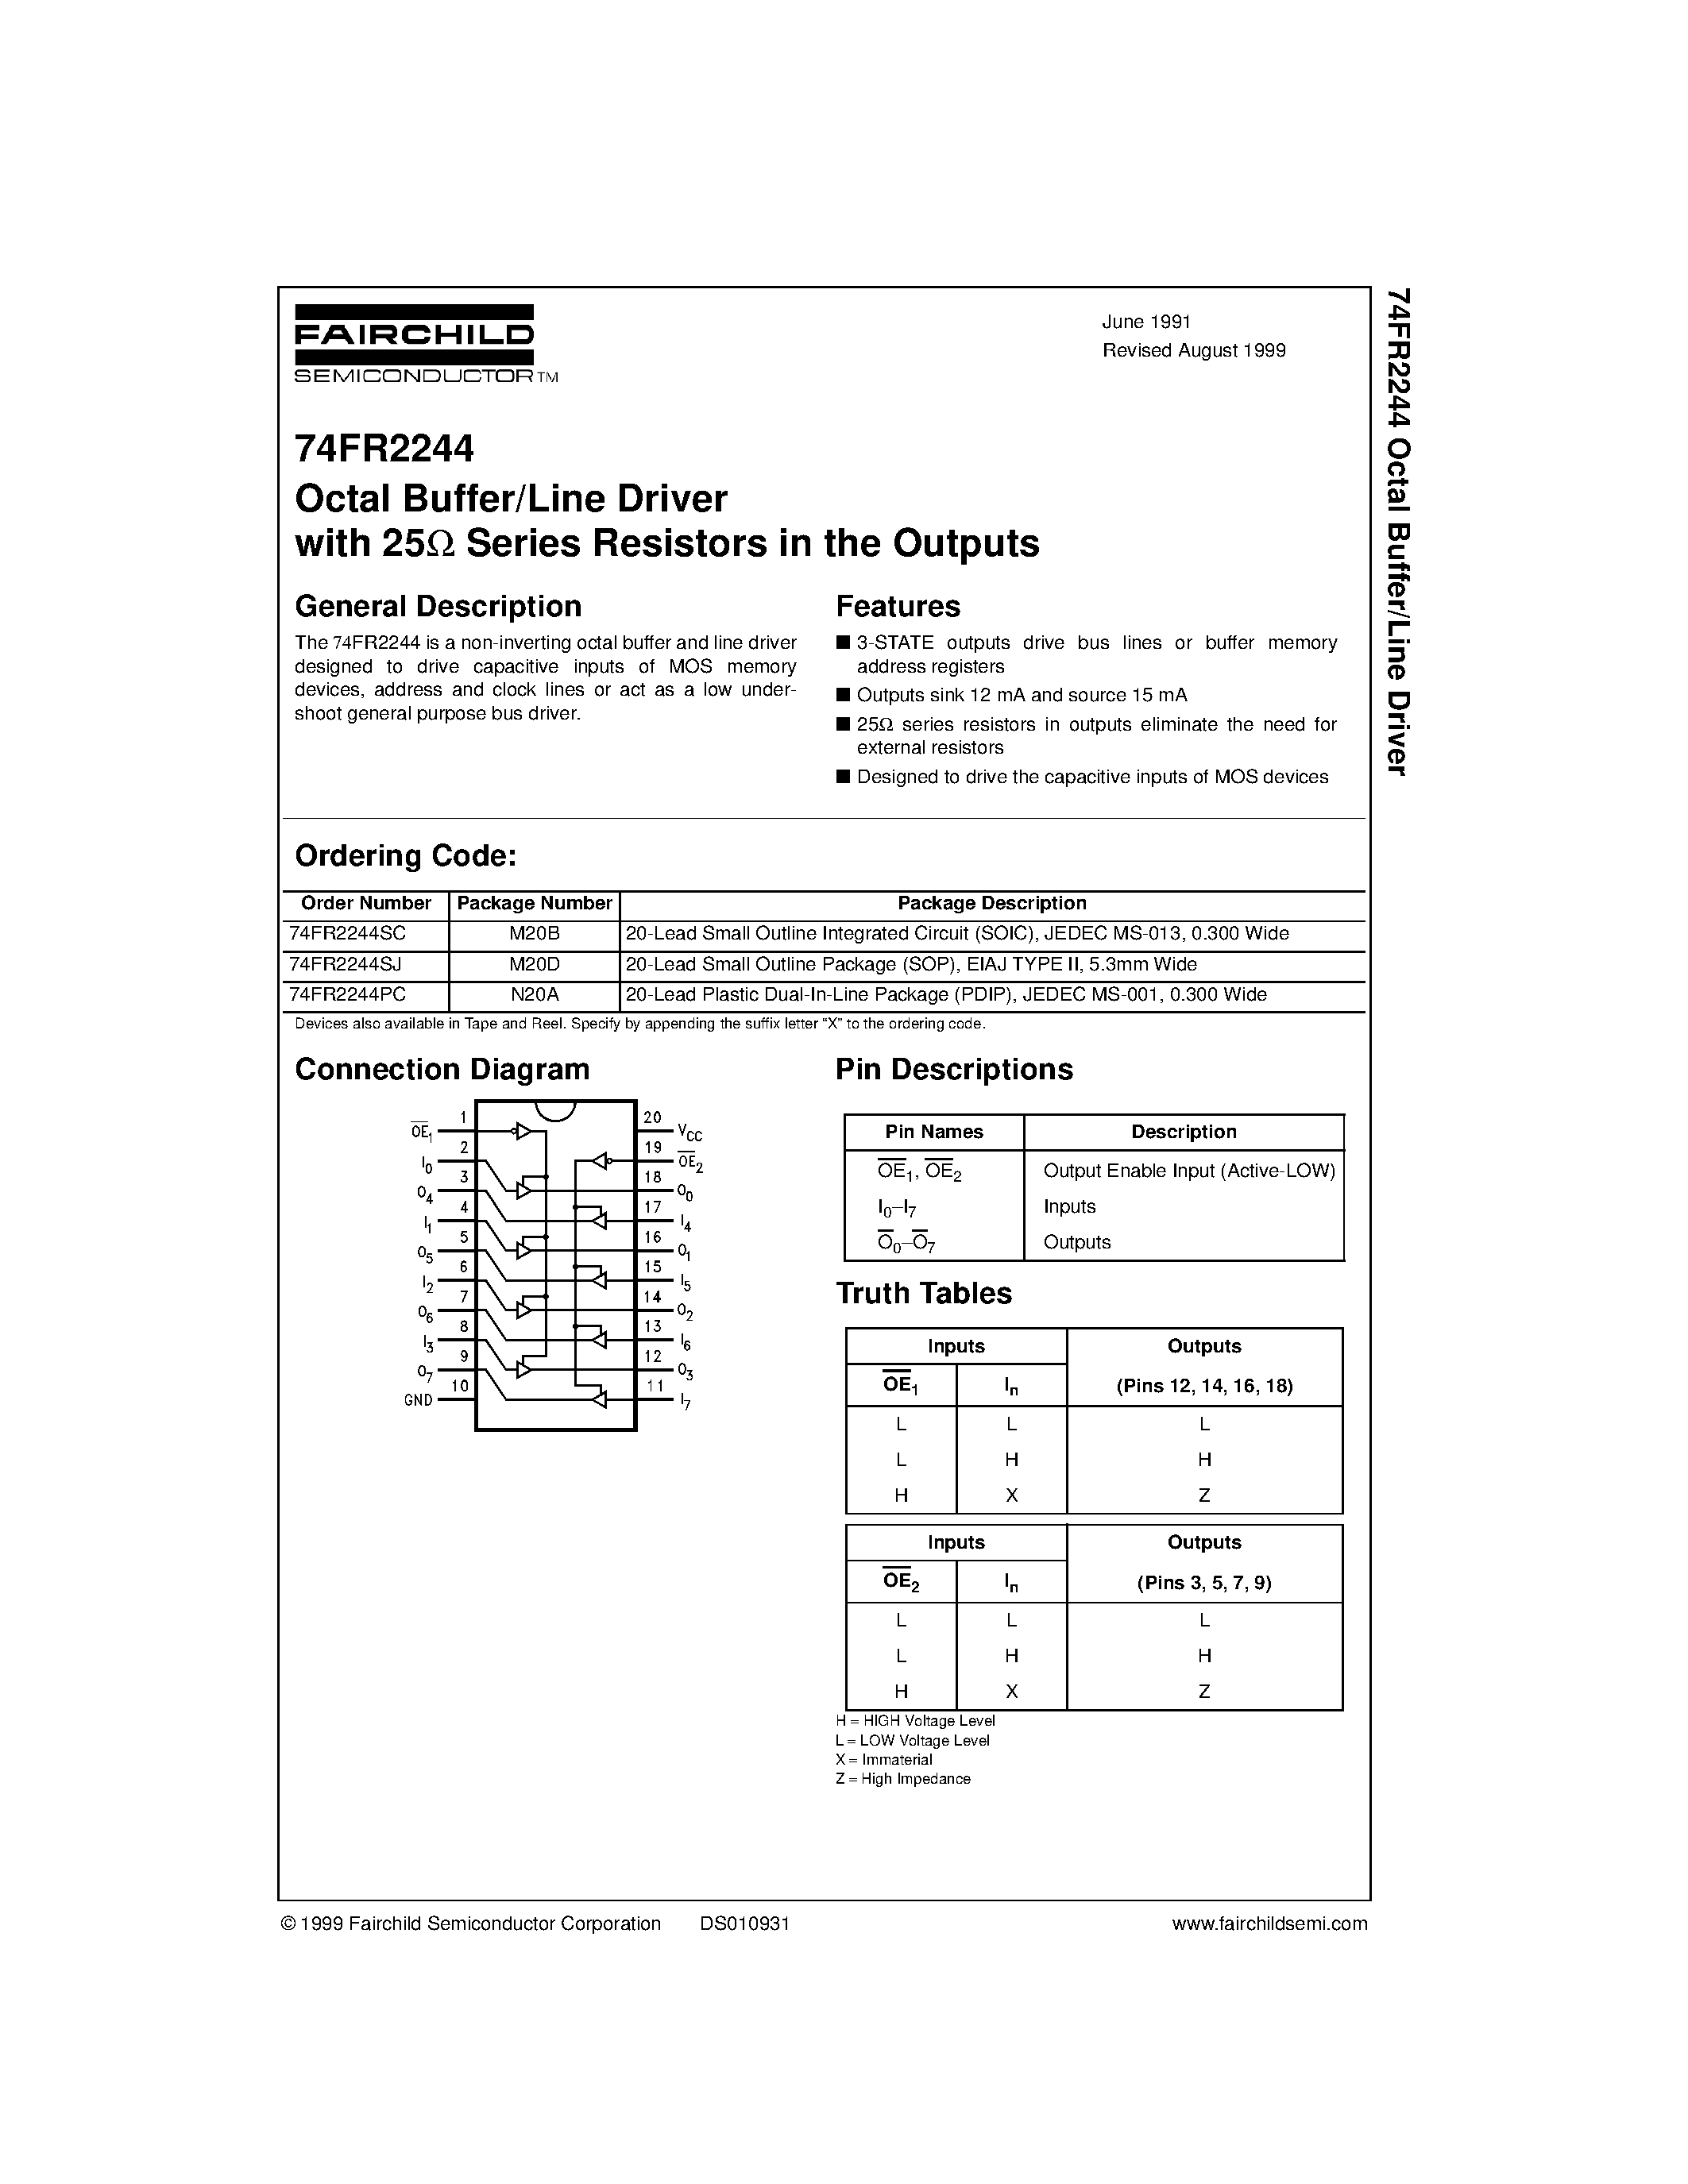 Datasheet 74FR2244PC - Octal Buffer/Line Driver with 25 Series Resistors in the Outputs page 1